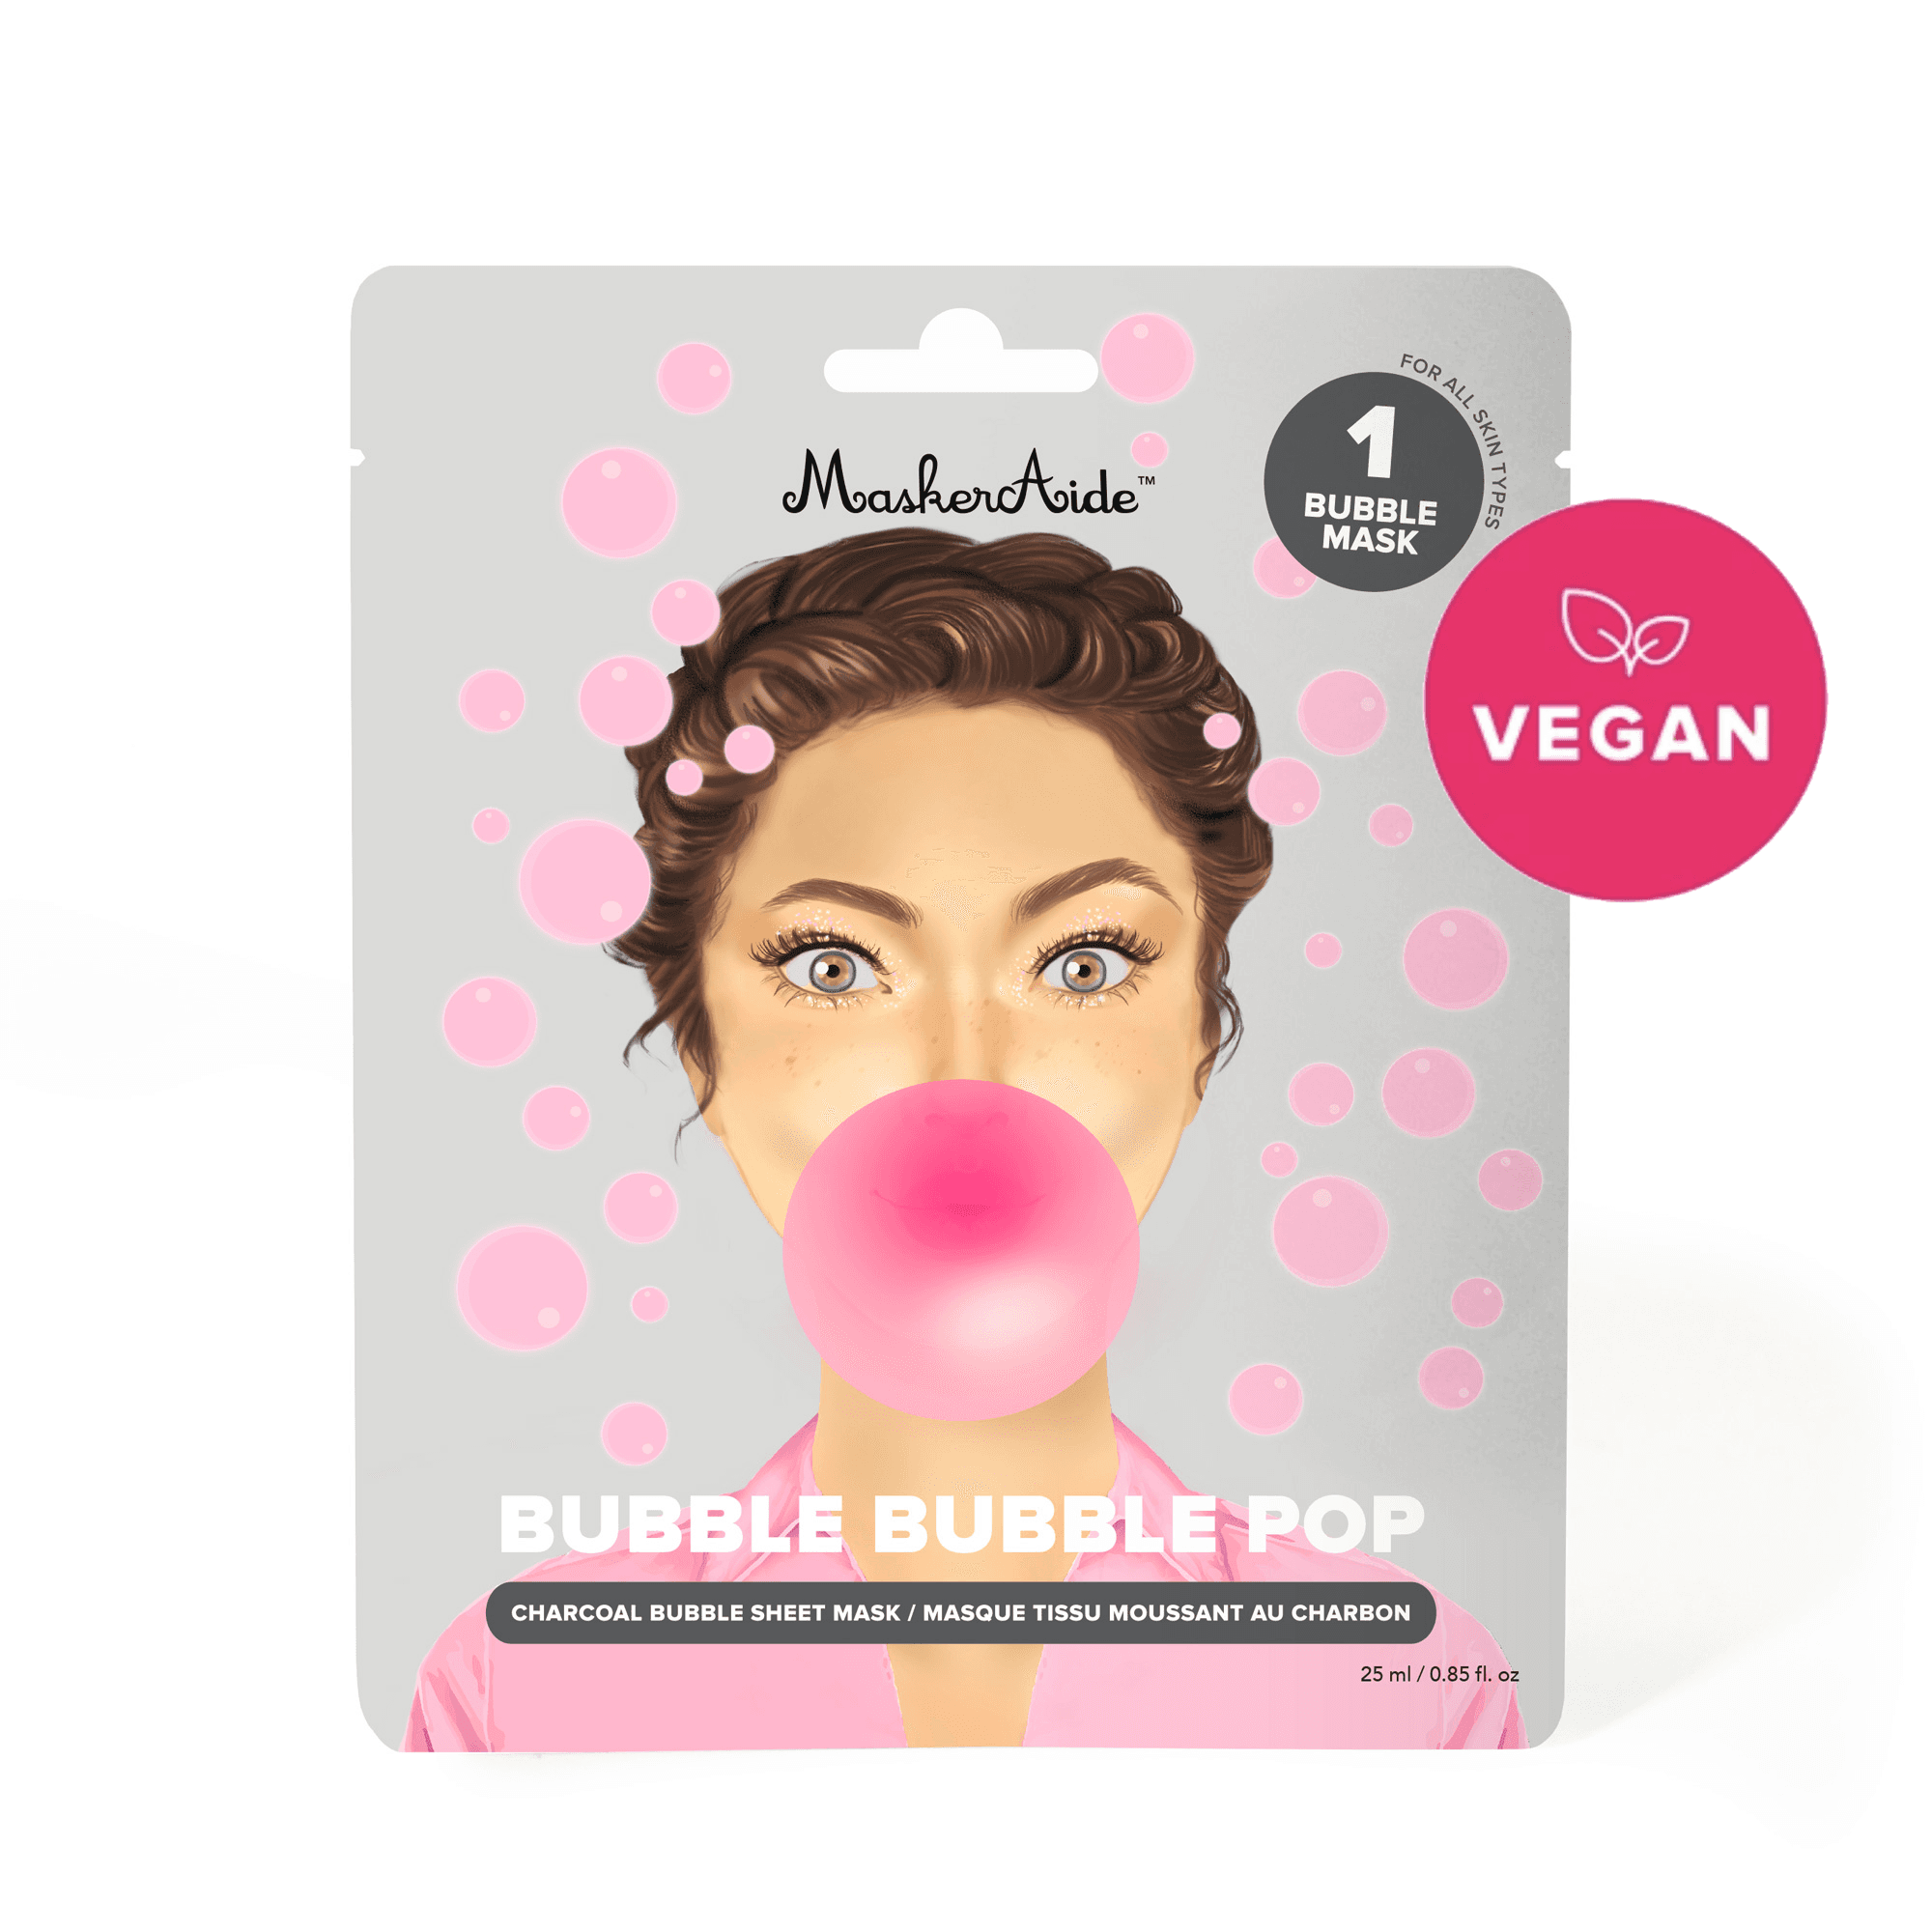 Pore Cleansing Charcoal Bubble Mask